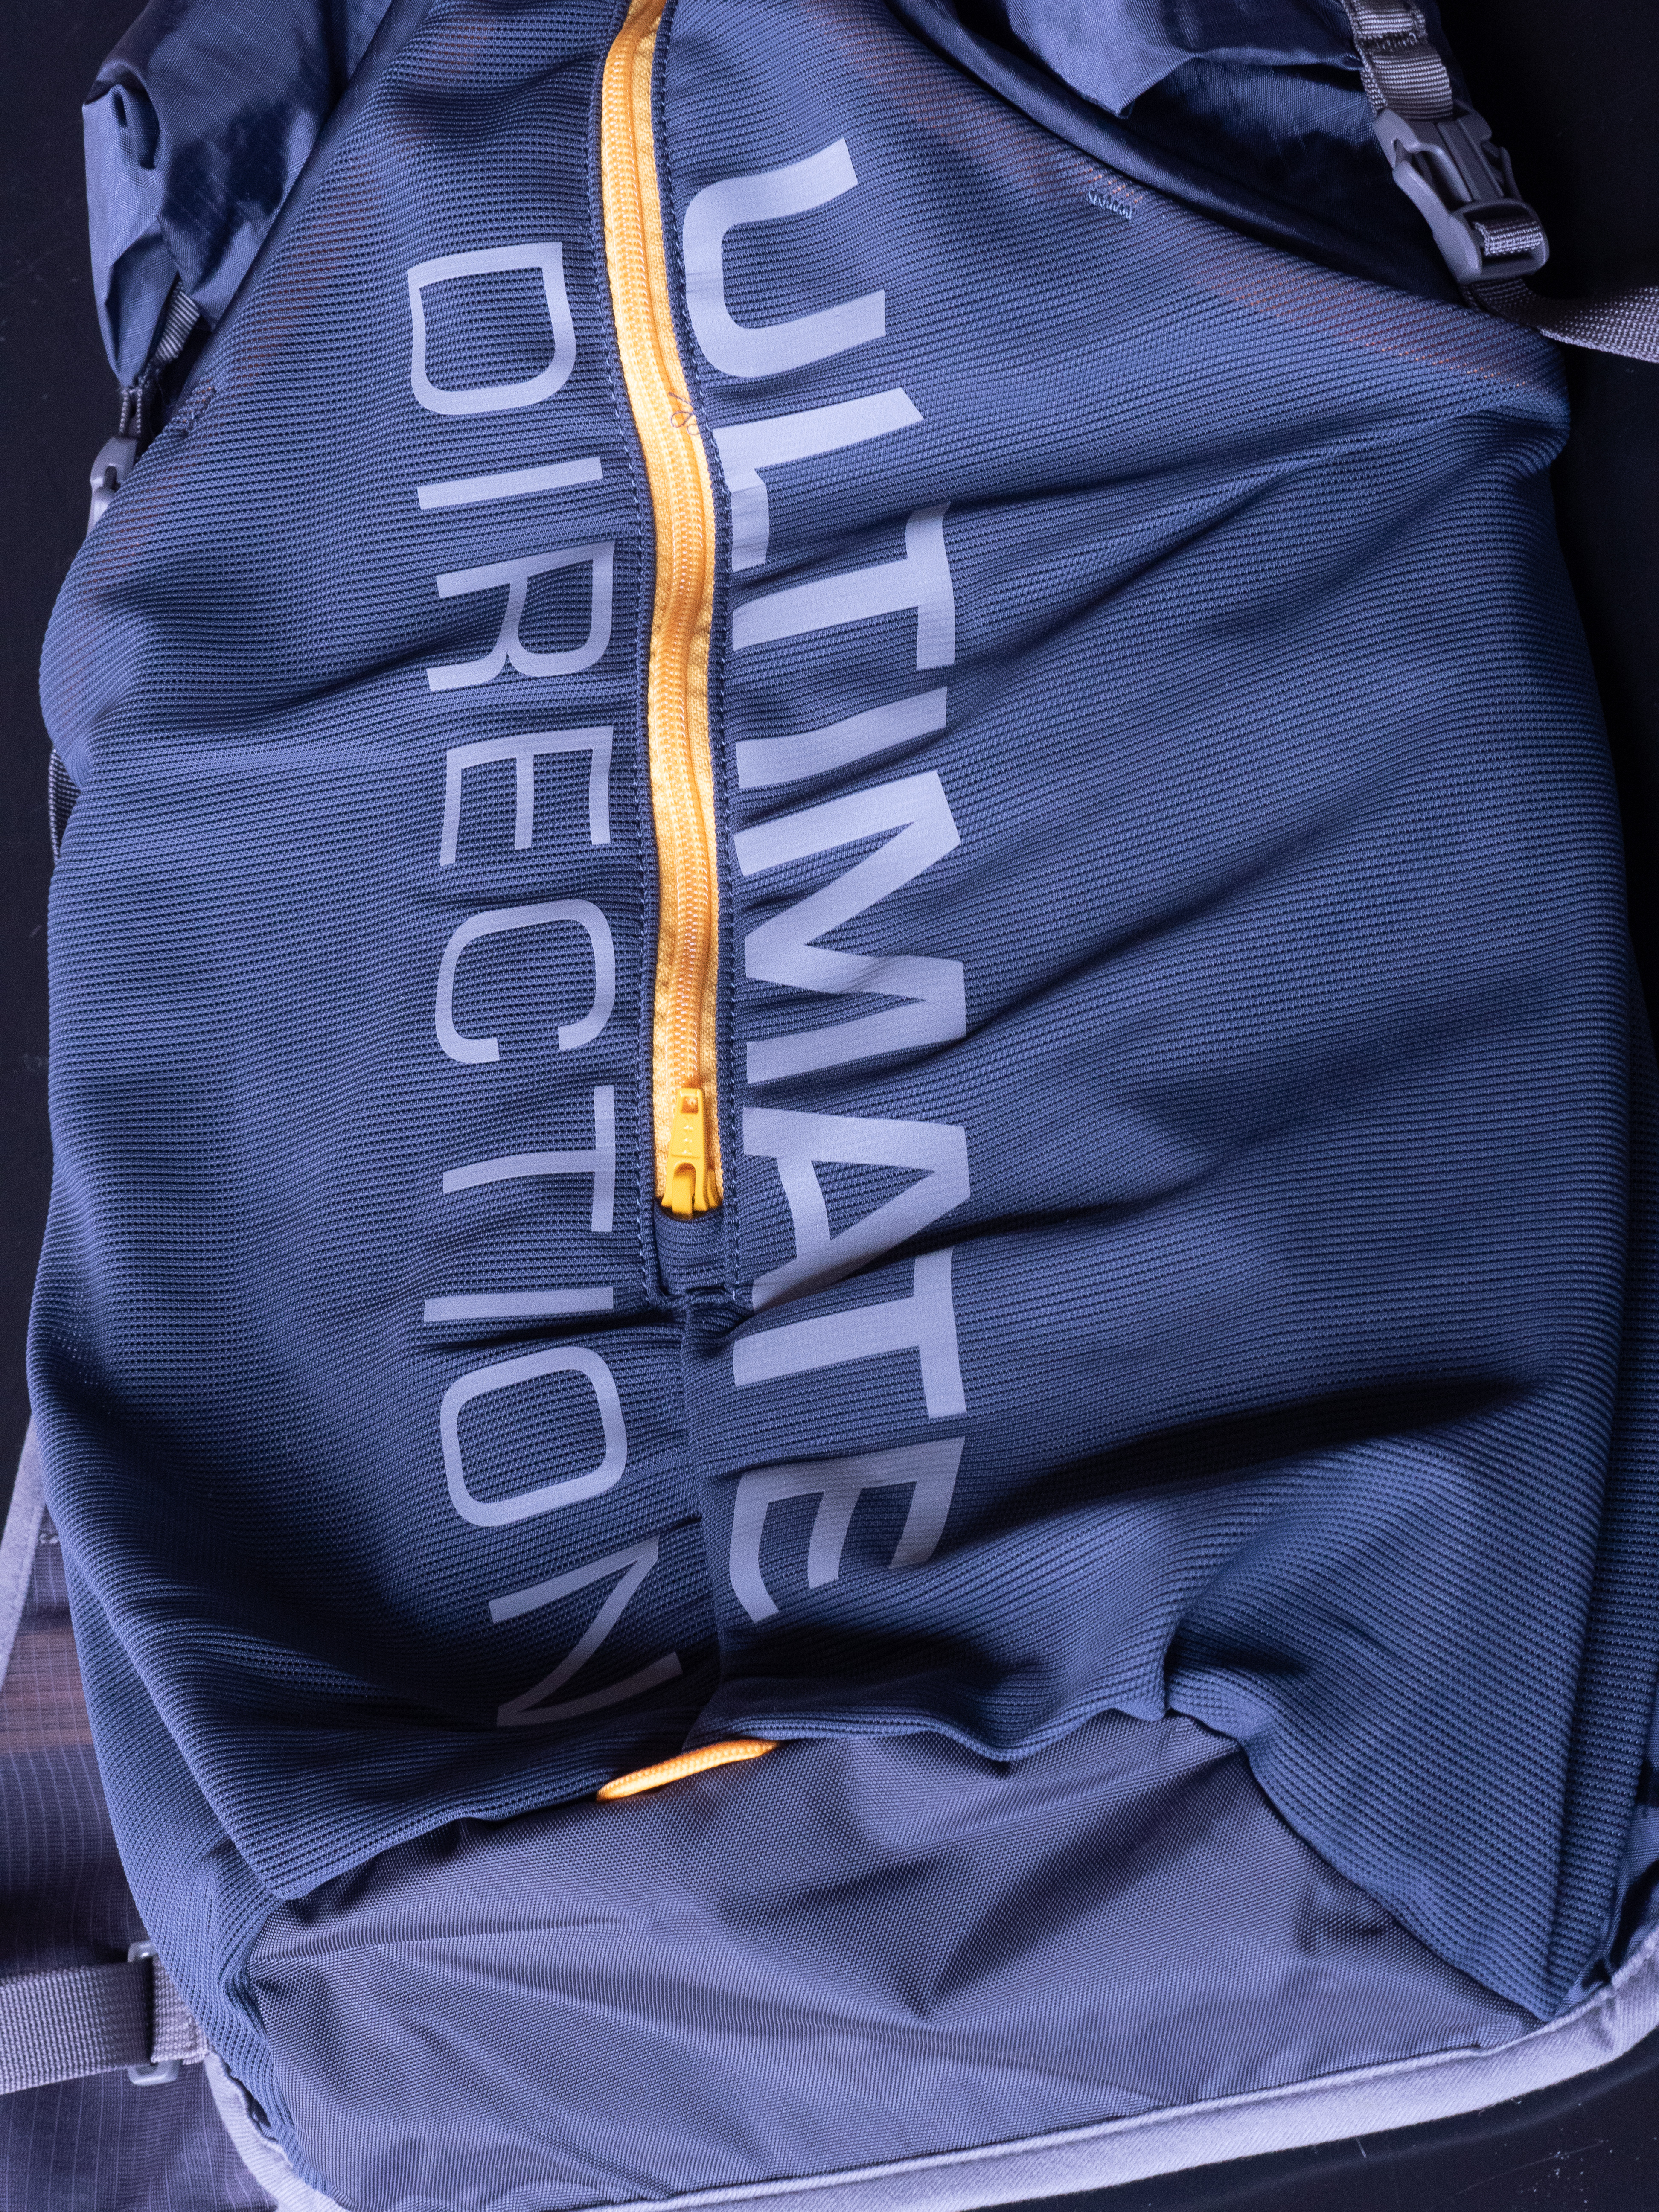 Review: Ultimate Direction Fastpack 15 – The Run Commuter